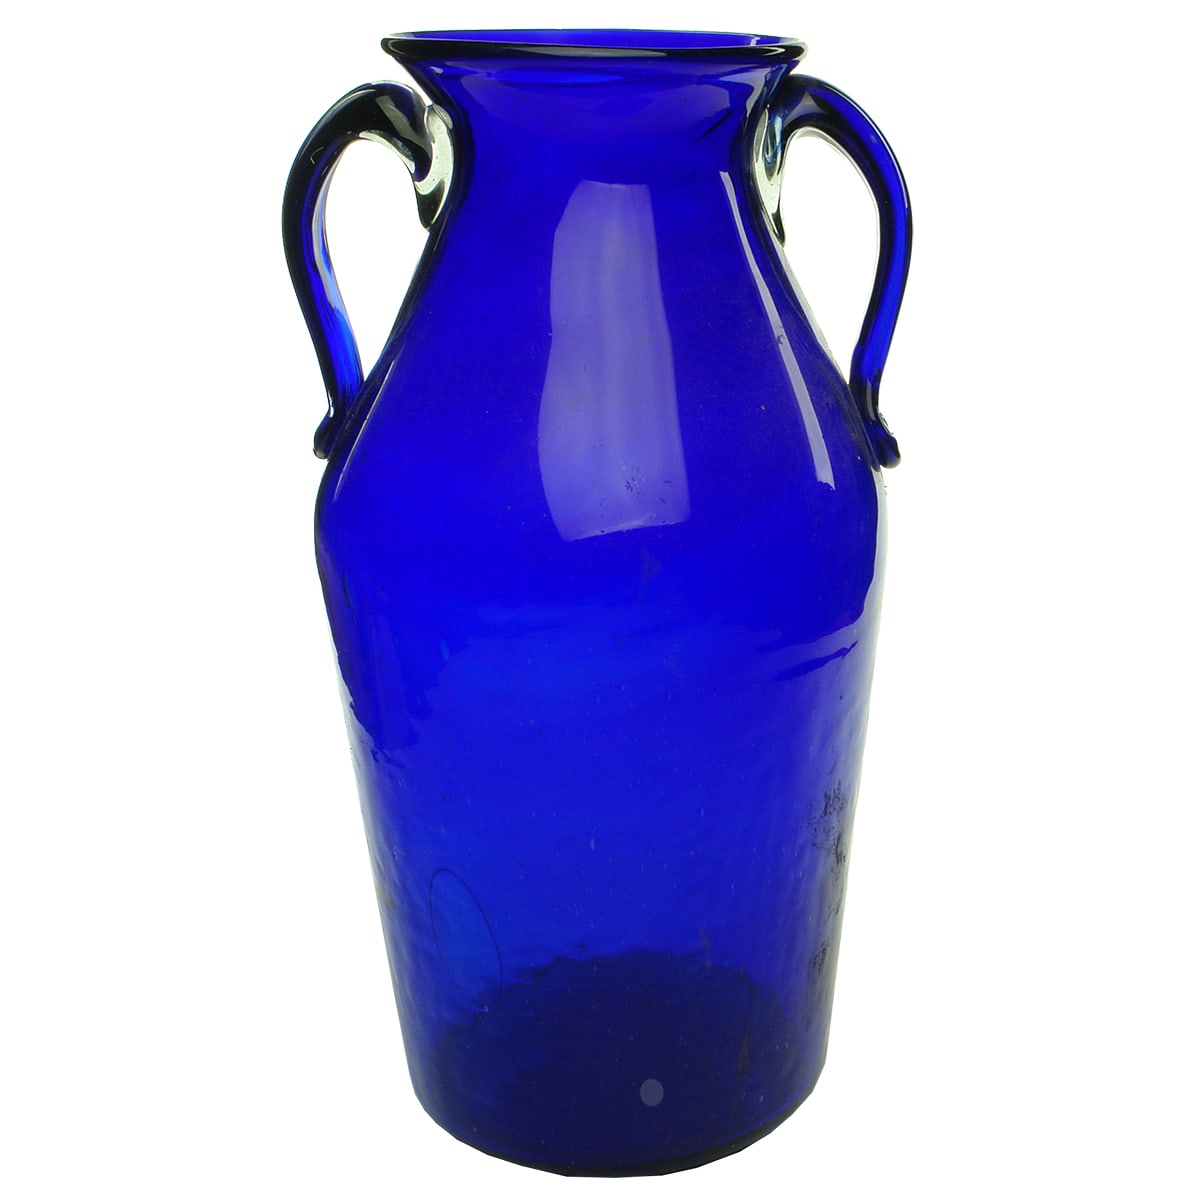 Giant blue vase with two handles. Pontil to base.